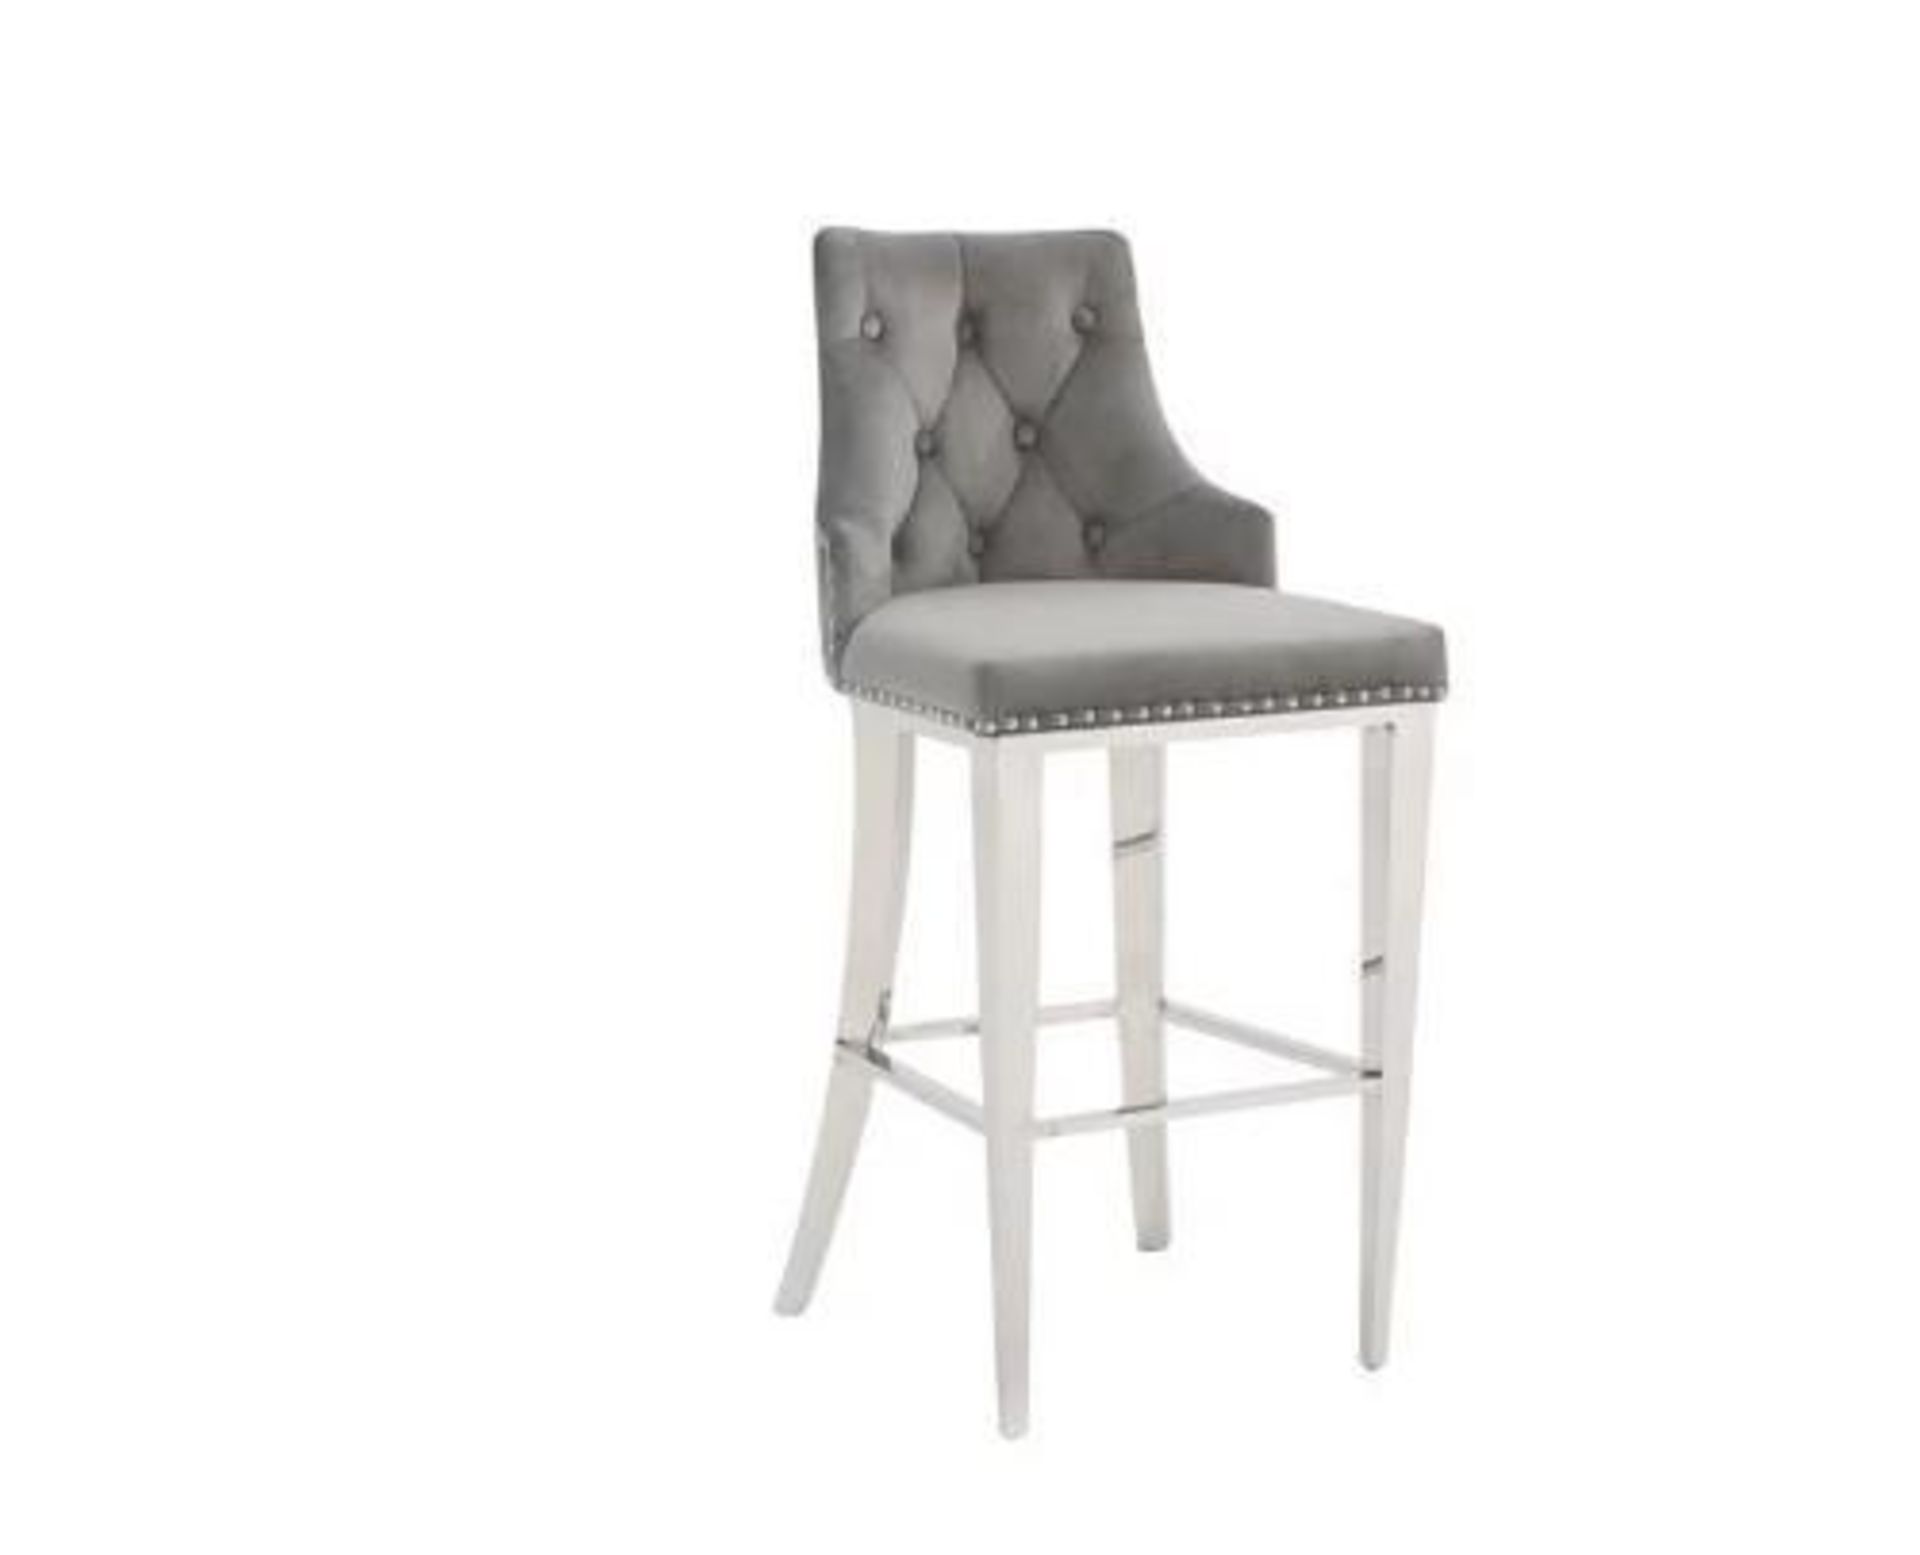 *BRAND NEW* Furniture Village Dolce Bar Stool in Grey. RRP: £279.00 - Image 4 of 5